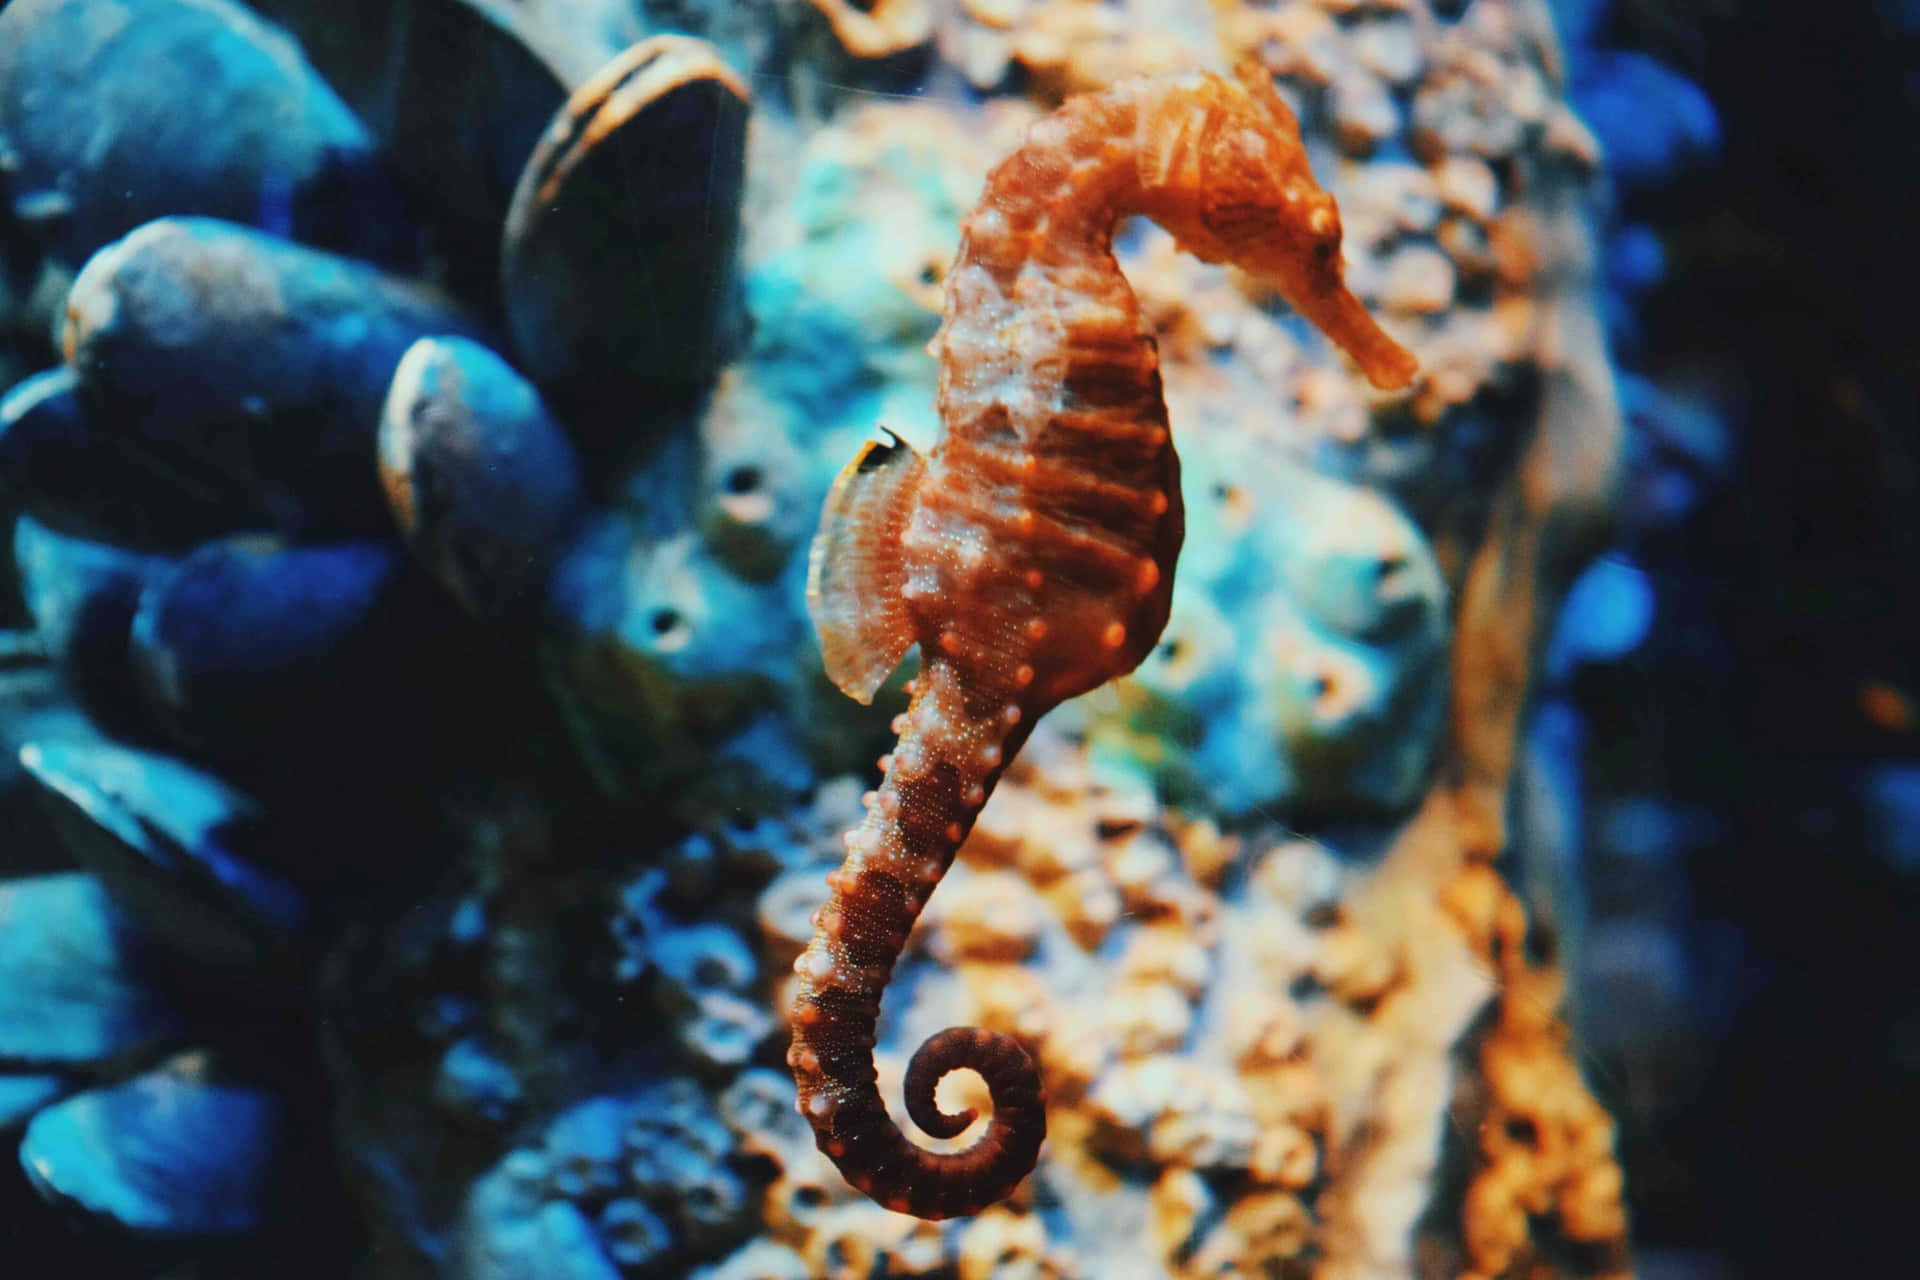 A cute seahorse swam in the inviting blue waters.